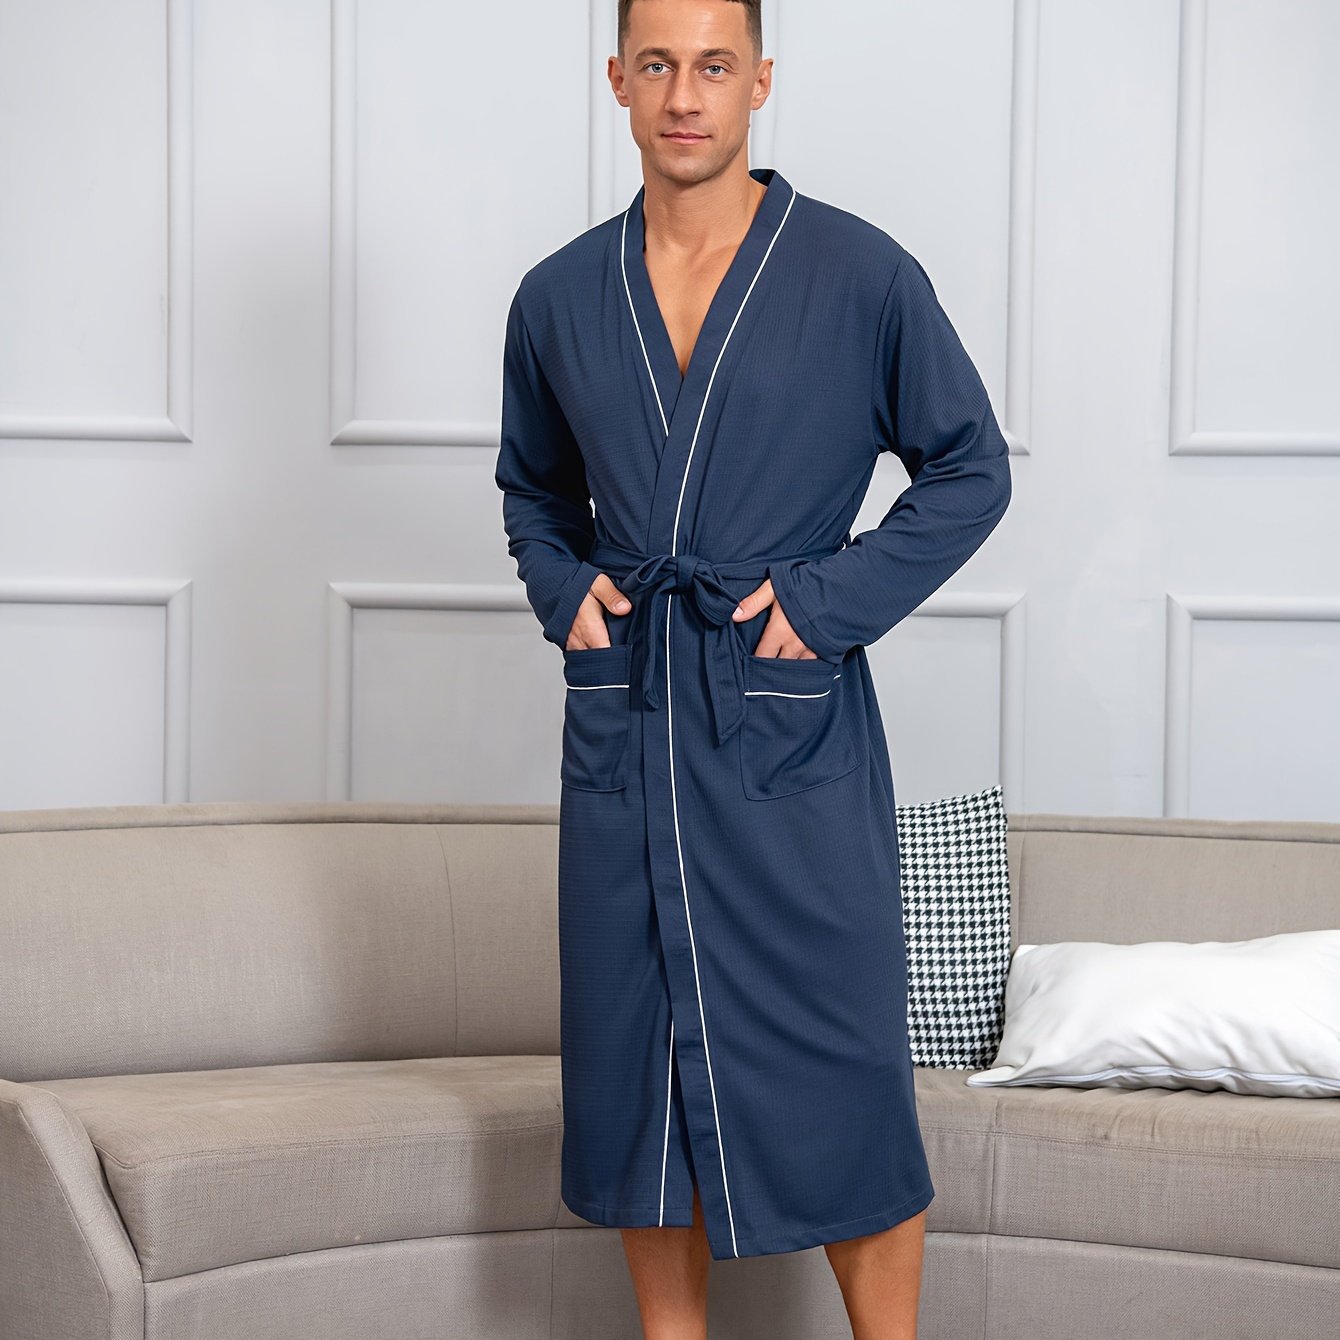 

Men's Comfy Solid Robe With Pockets, Home Pajamas Wear One-piece Lace Up Night-robe Sets For Spring Summer Wearing